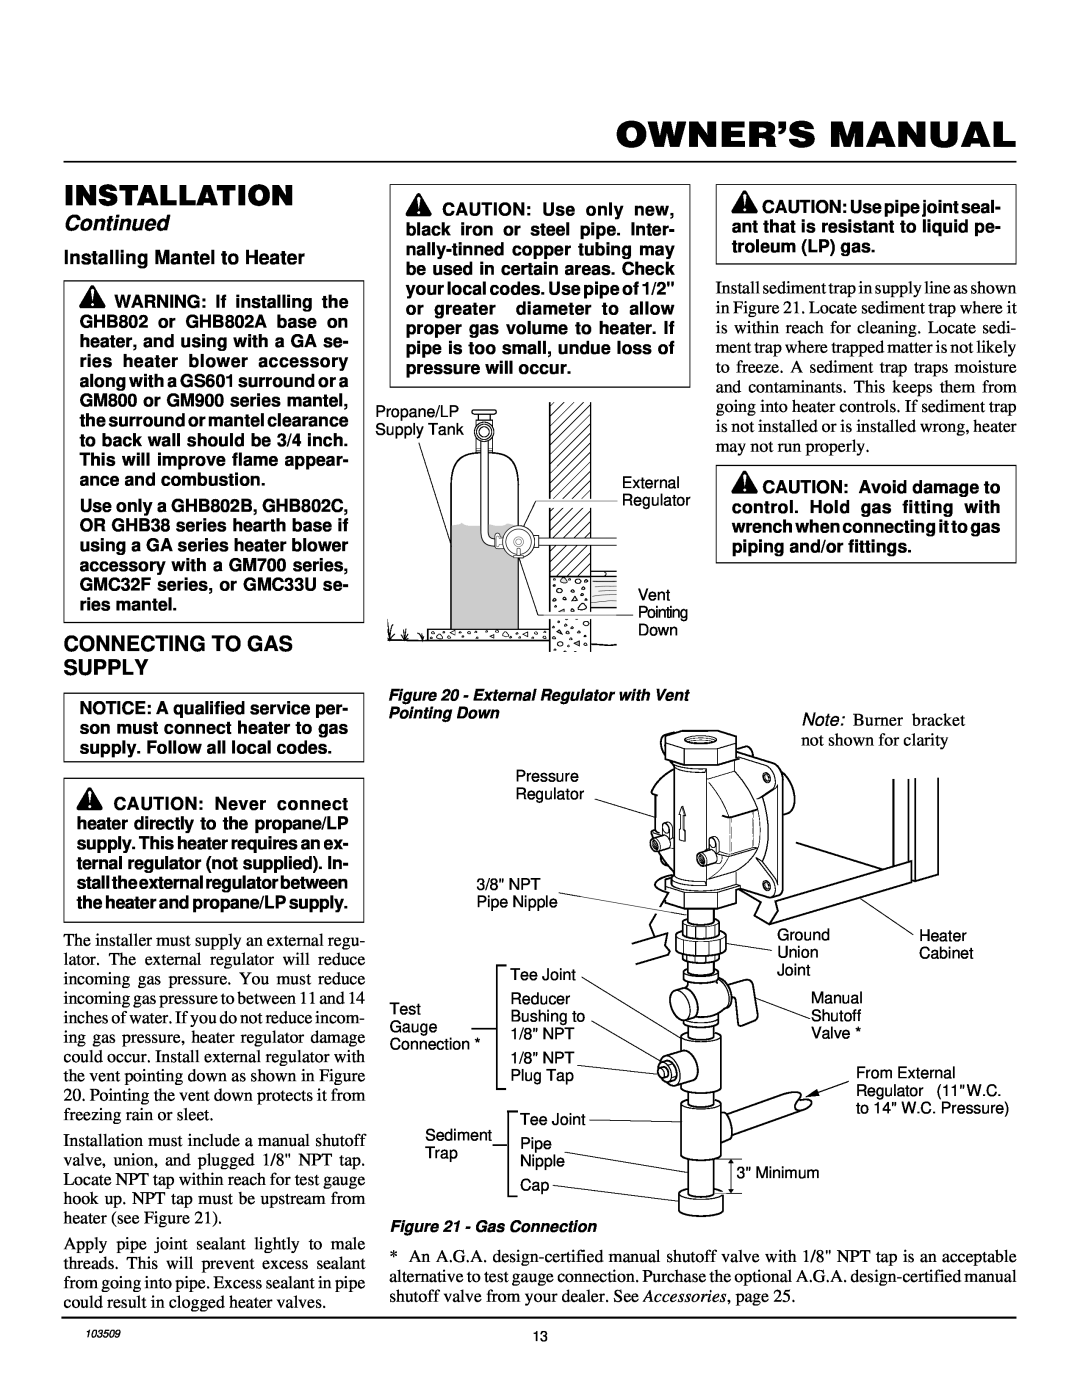 Desa Tech RFP28TC installation manual Connecting To Gas Supply, Installing Mantel to Heater, Installation, Continued 